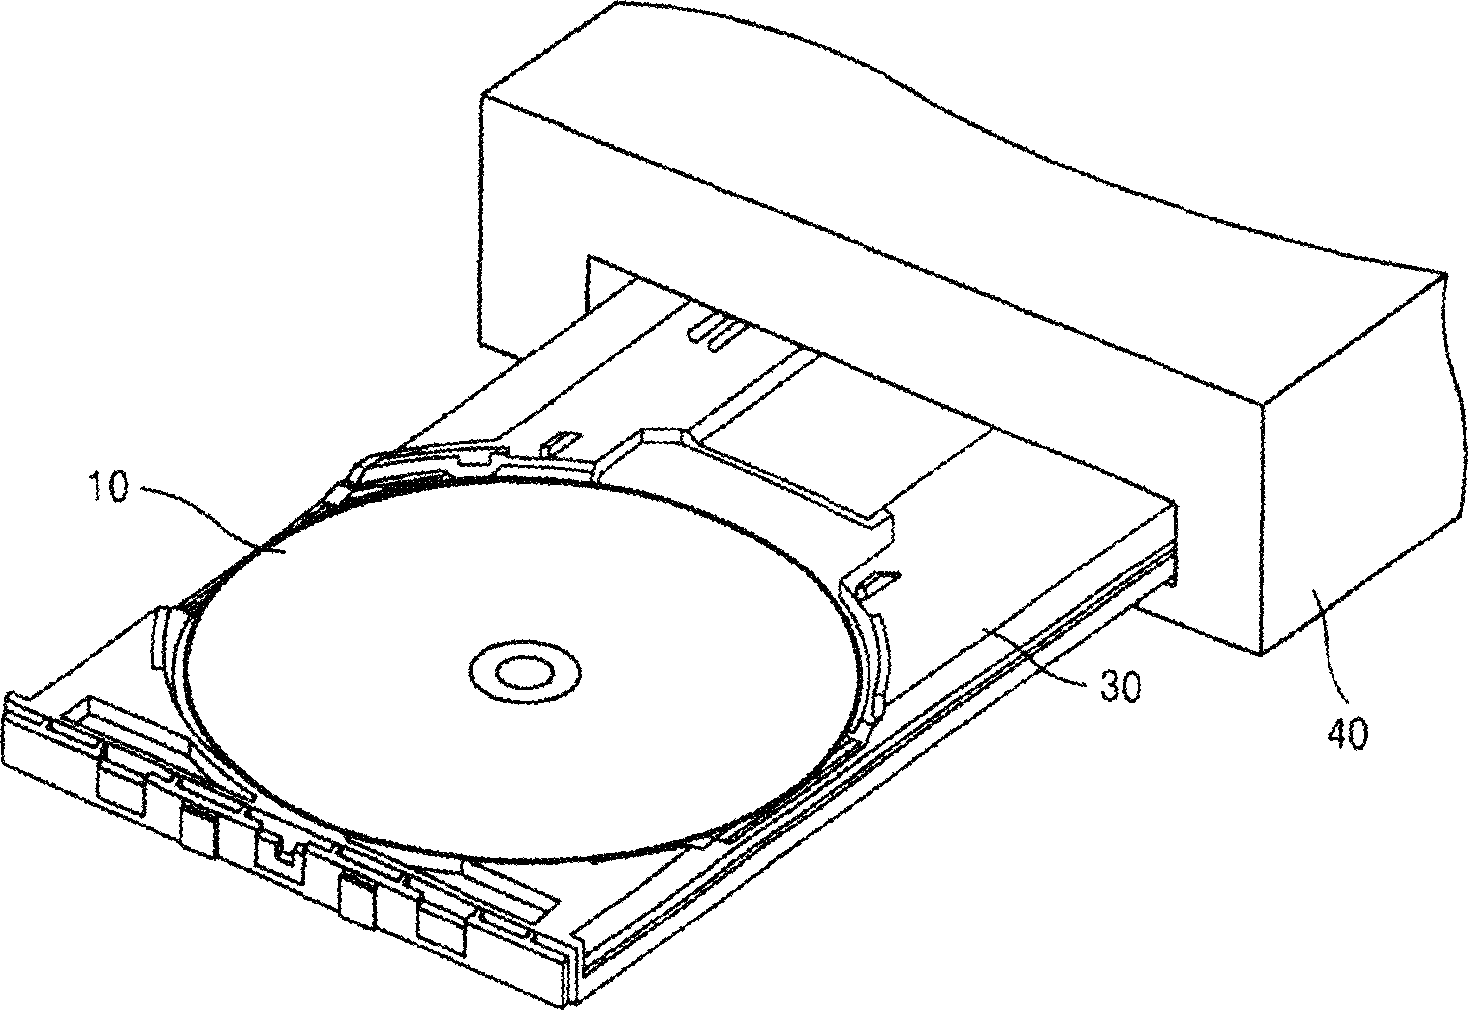 Optical disk driver with novel structure